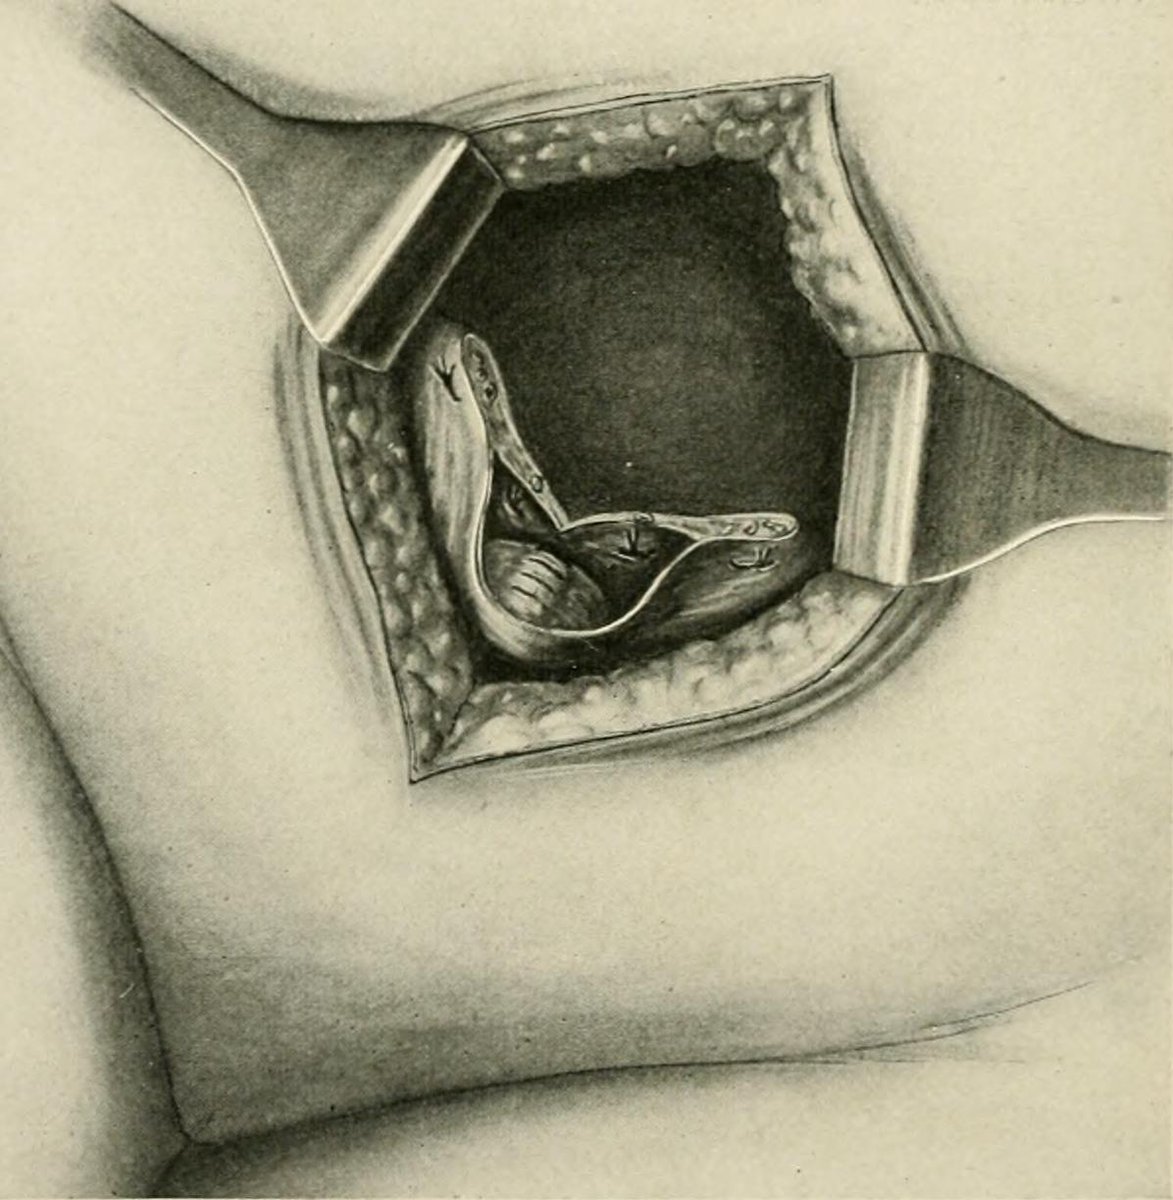 1910 medical illustration showing sutures in the cervical stump following an abdominal hysterectomy. The text recommends suturing the stump to remaining ligaments to provide support to the pelvic floor and prevent prolapse.